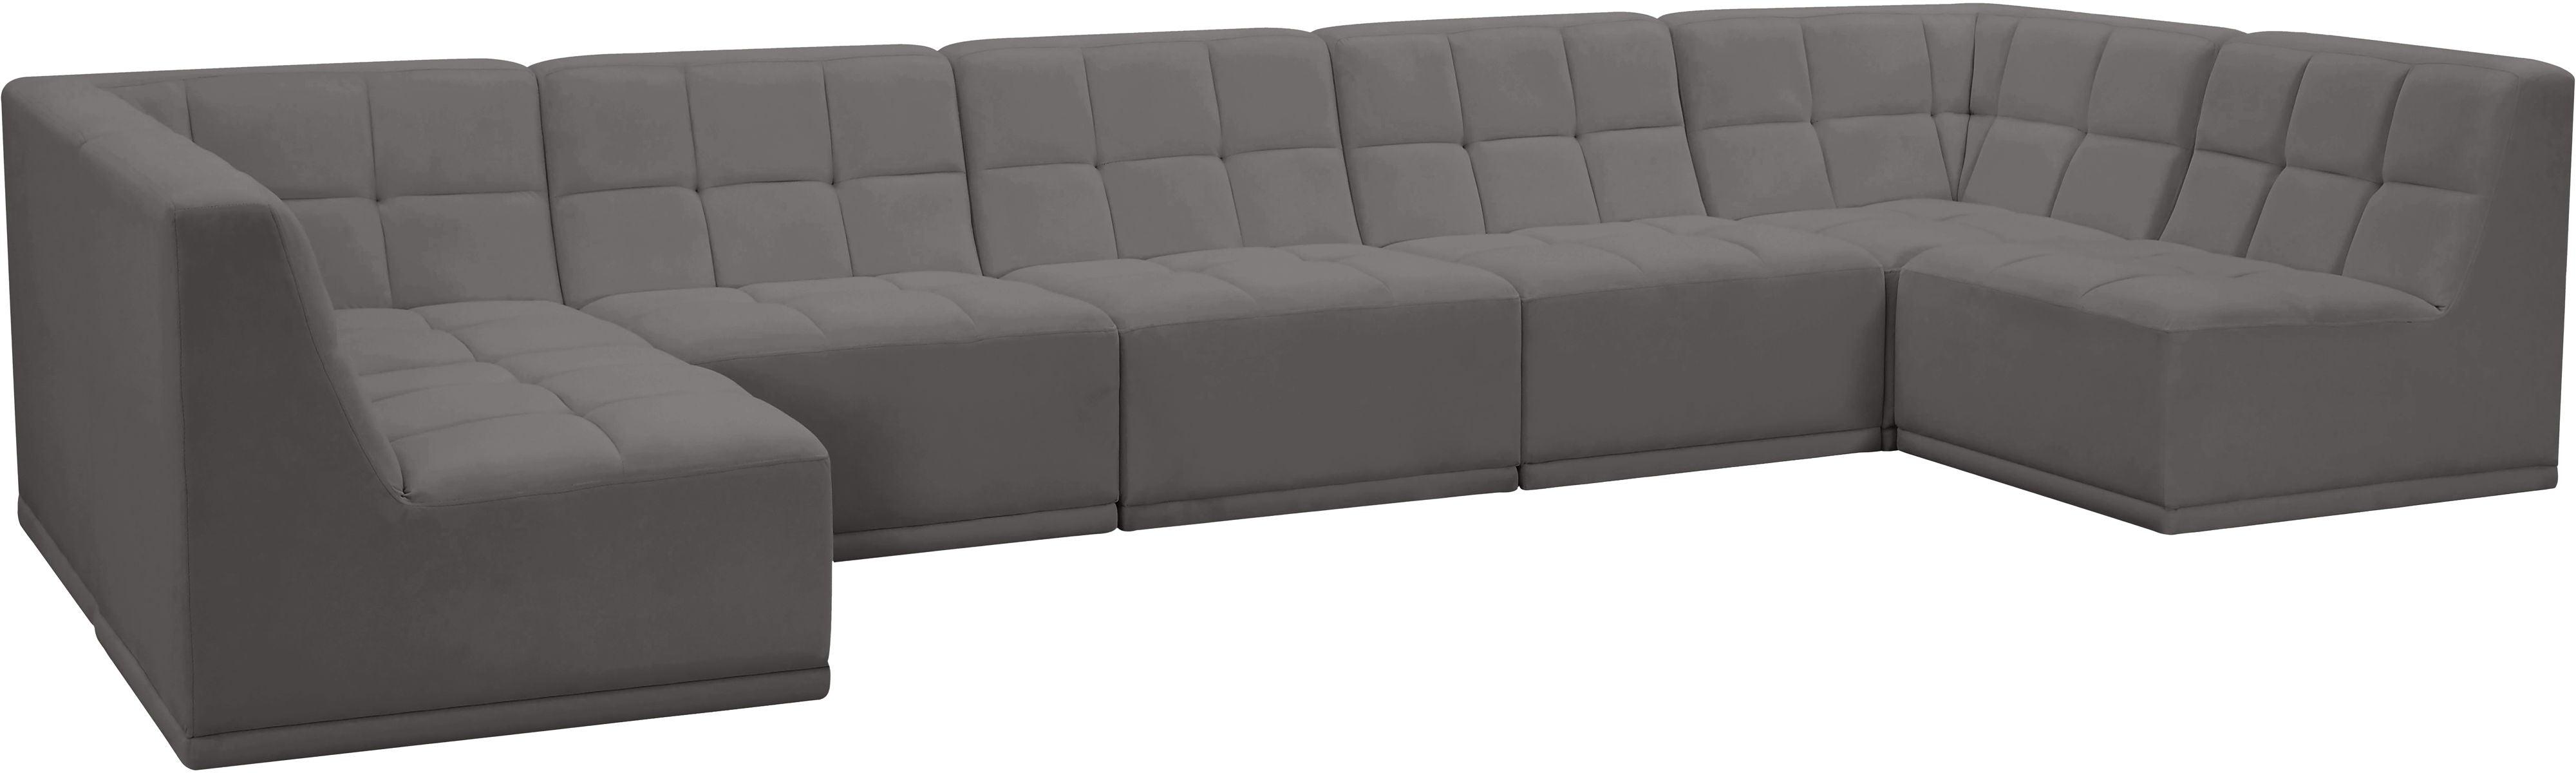 Meridian Furniture - Relax - Modular Sectional 7 Piece - Gray - 5th Avenue Furniture